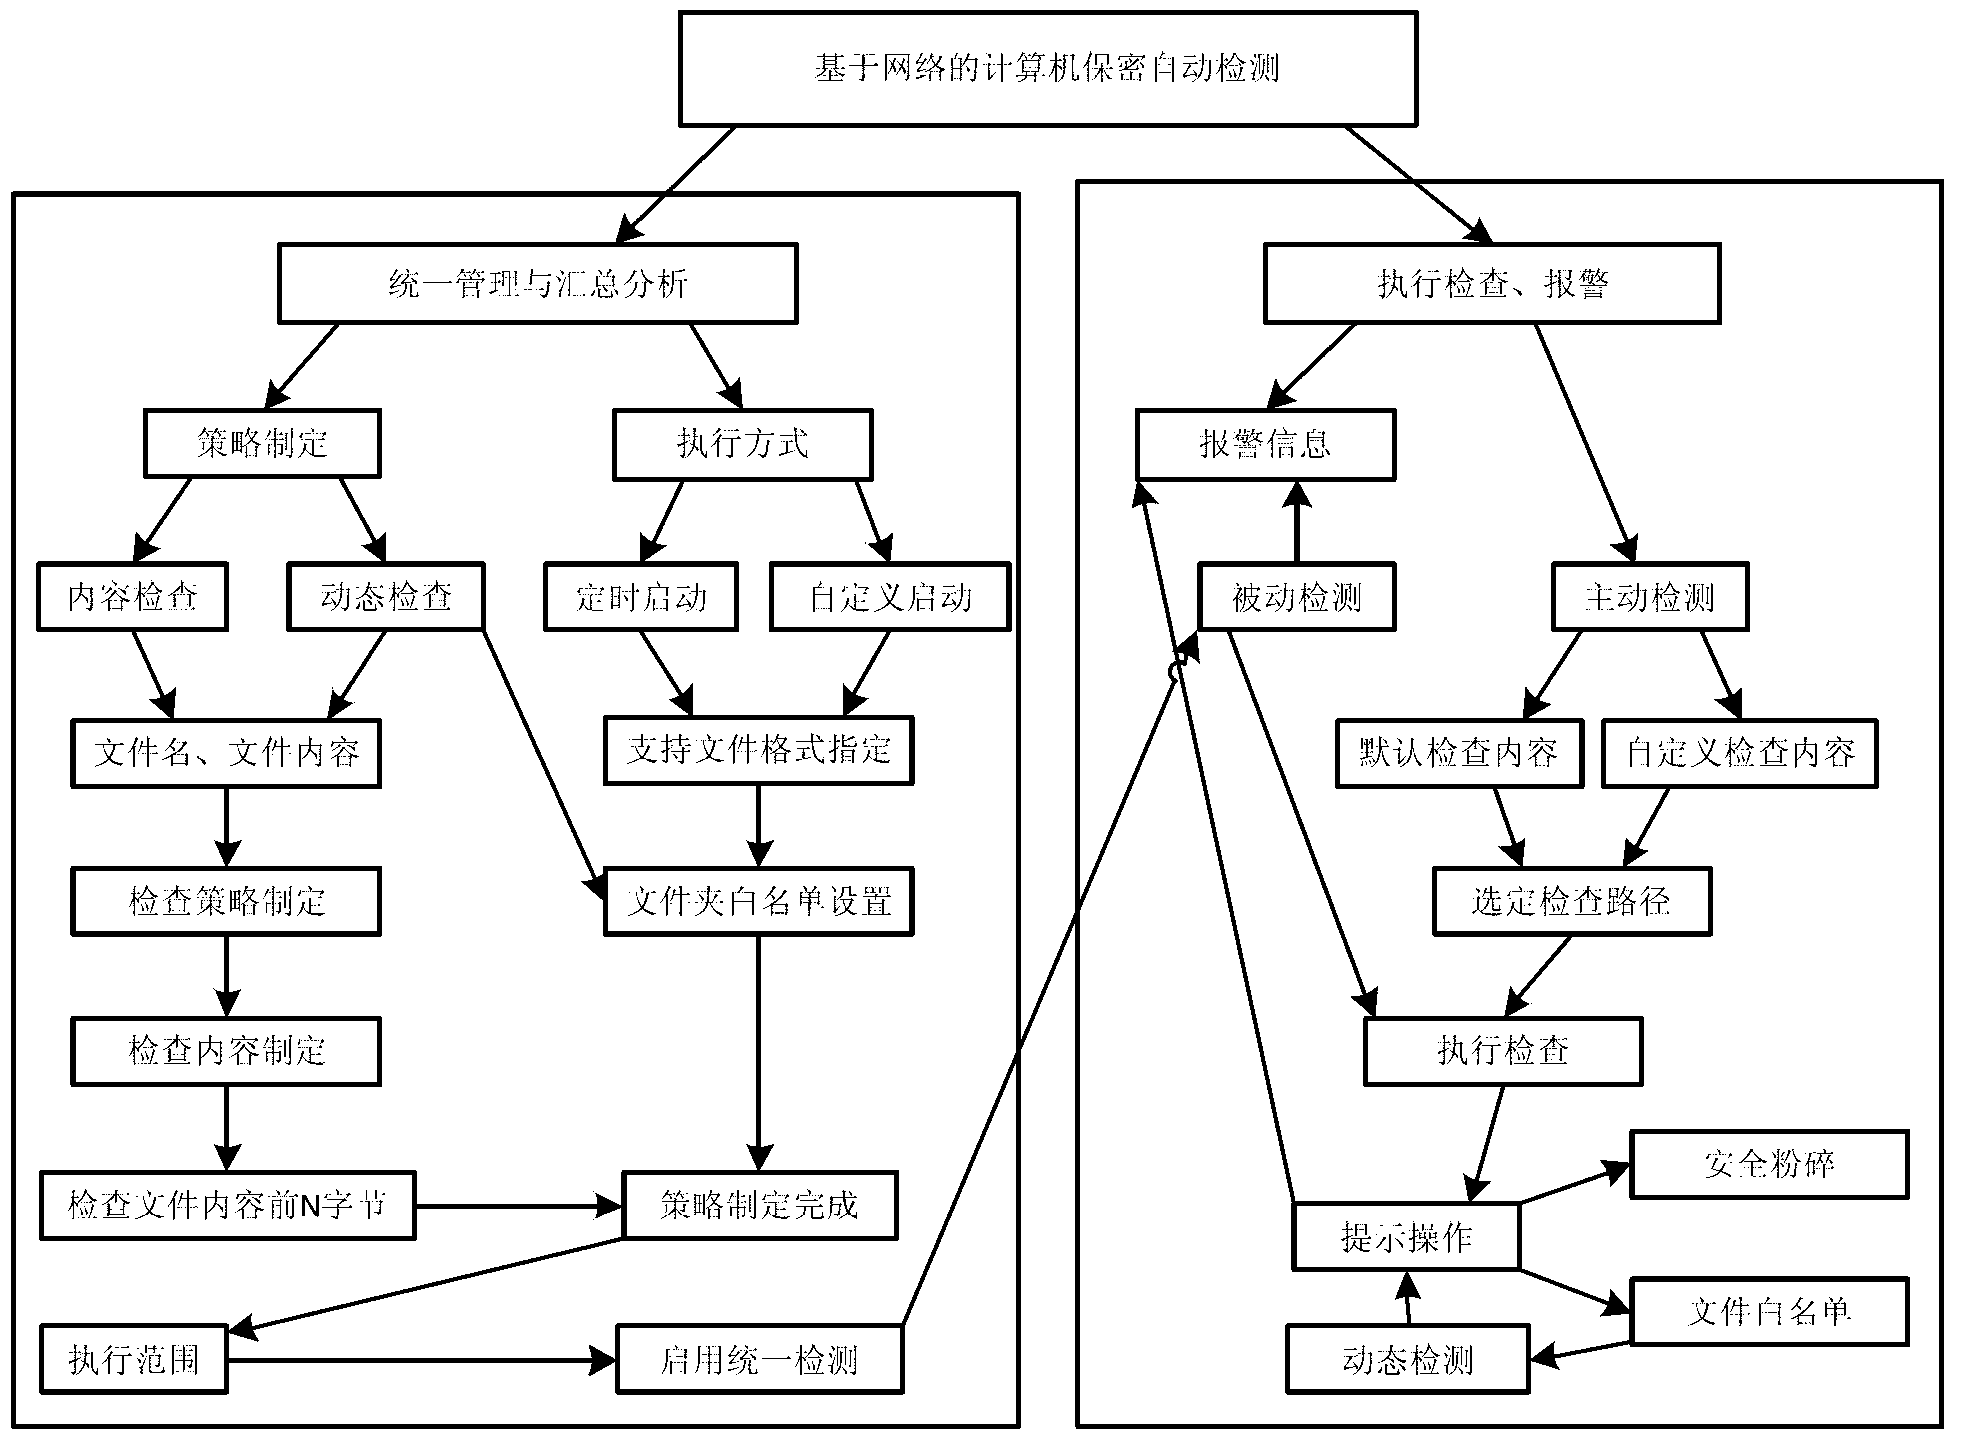 Computer information privacy detection method based on network